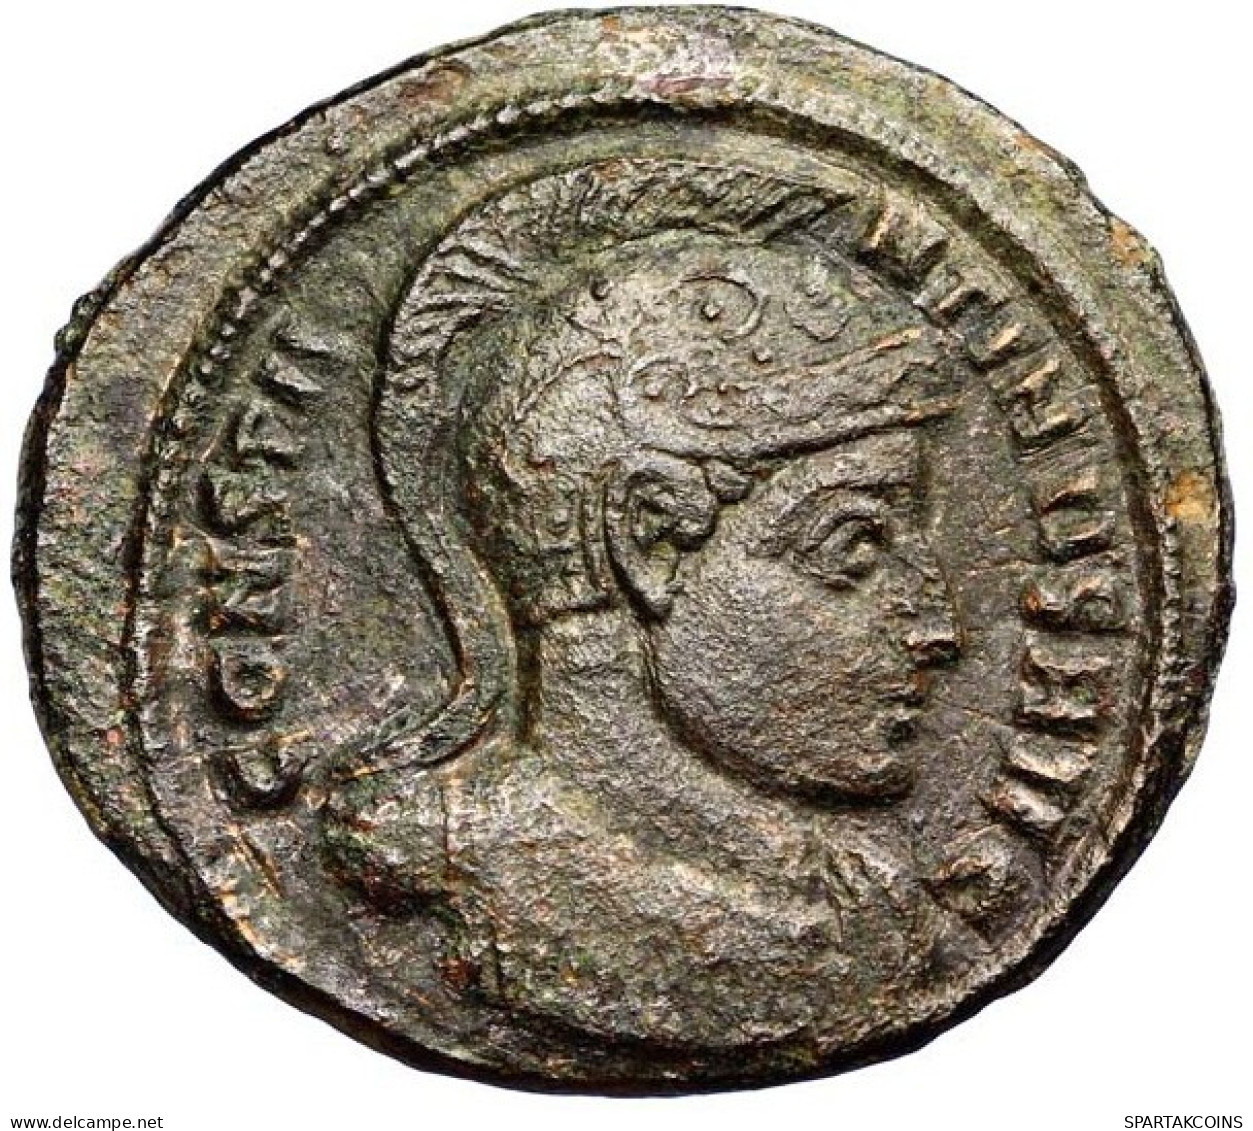 CONSTANTINE I THE GREAT Mint Aquilee 320 Rarity: R2 2.96g/19.5mm #ANC10009.48.U.A - The Christian Empire (307 AD To 363 AD)